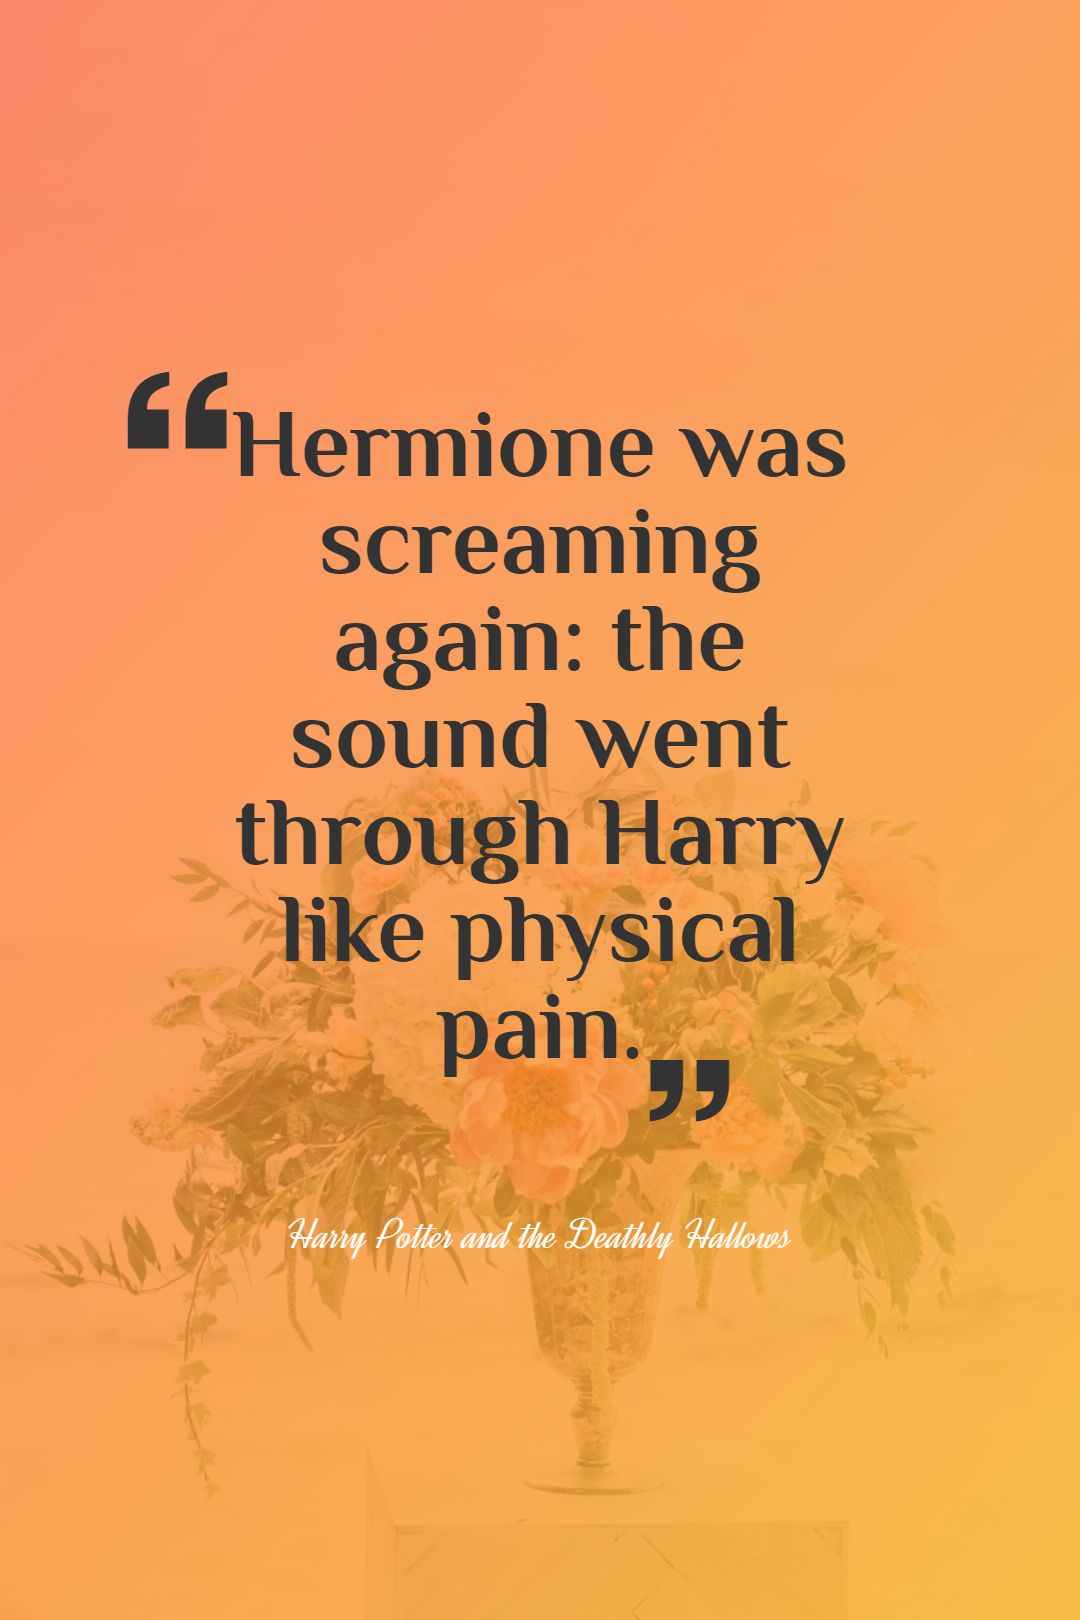 Hermione was screaming again the sound went through Harry like physical pain.